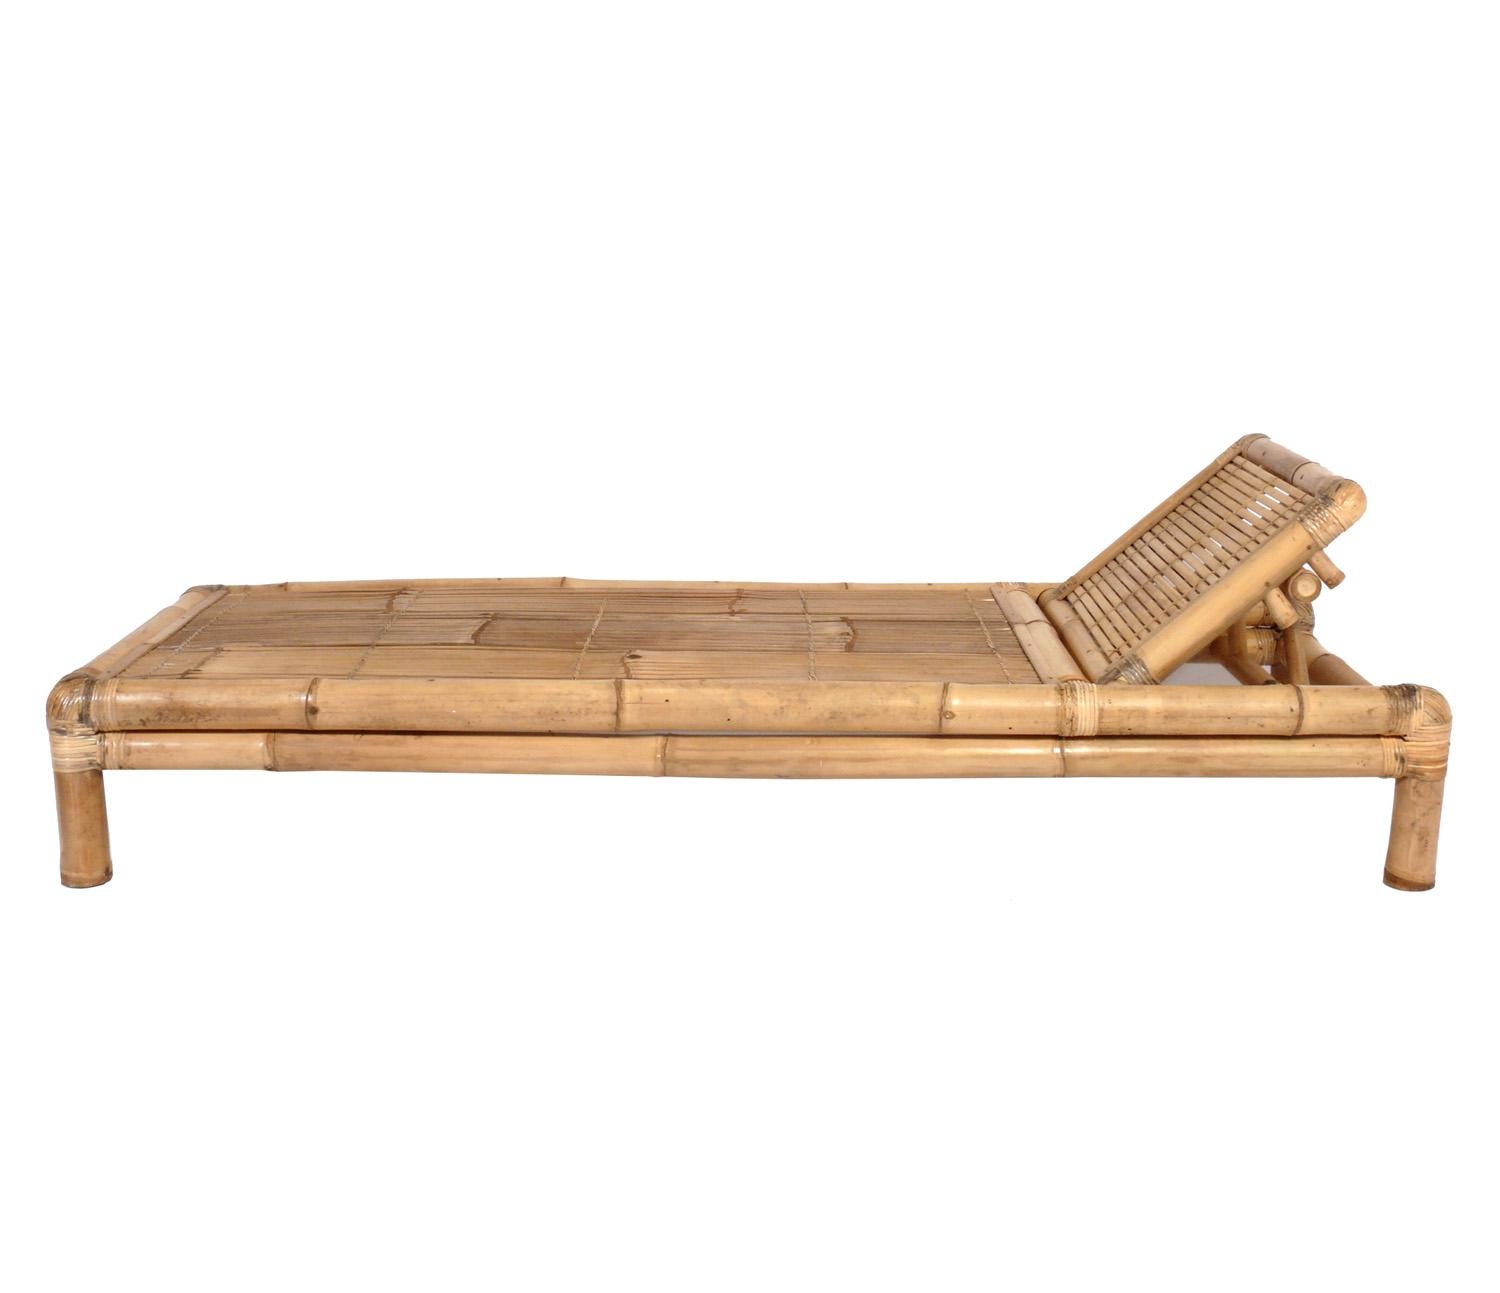 Selection of mid-century bamboo chaise longues, American, circa 1950s. They are priced at $1850 each or $3200 for the pair. They retain their warm original patina. Adjustable headrests still function well. If you would like cushions made for these,